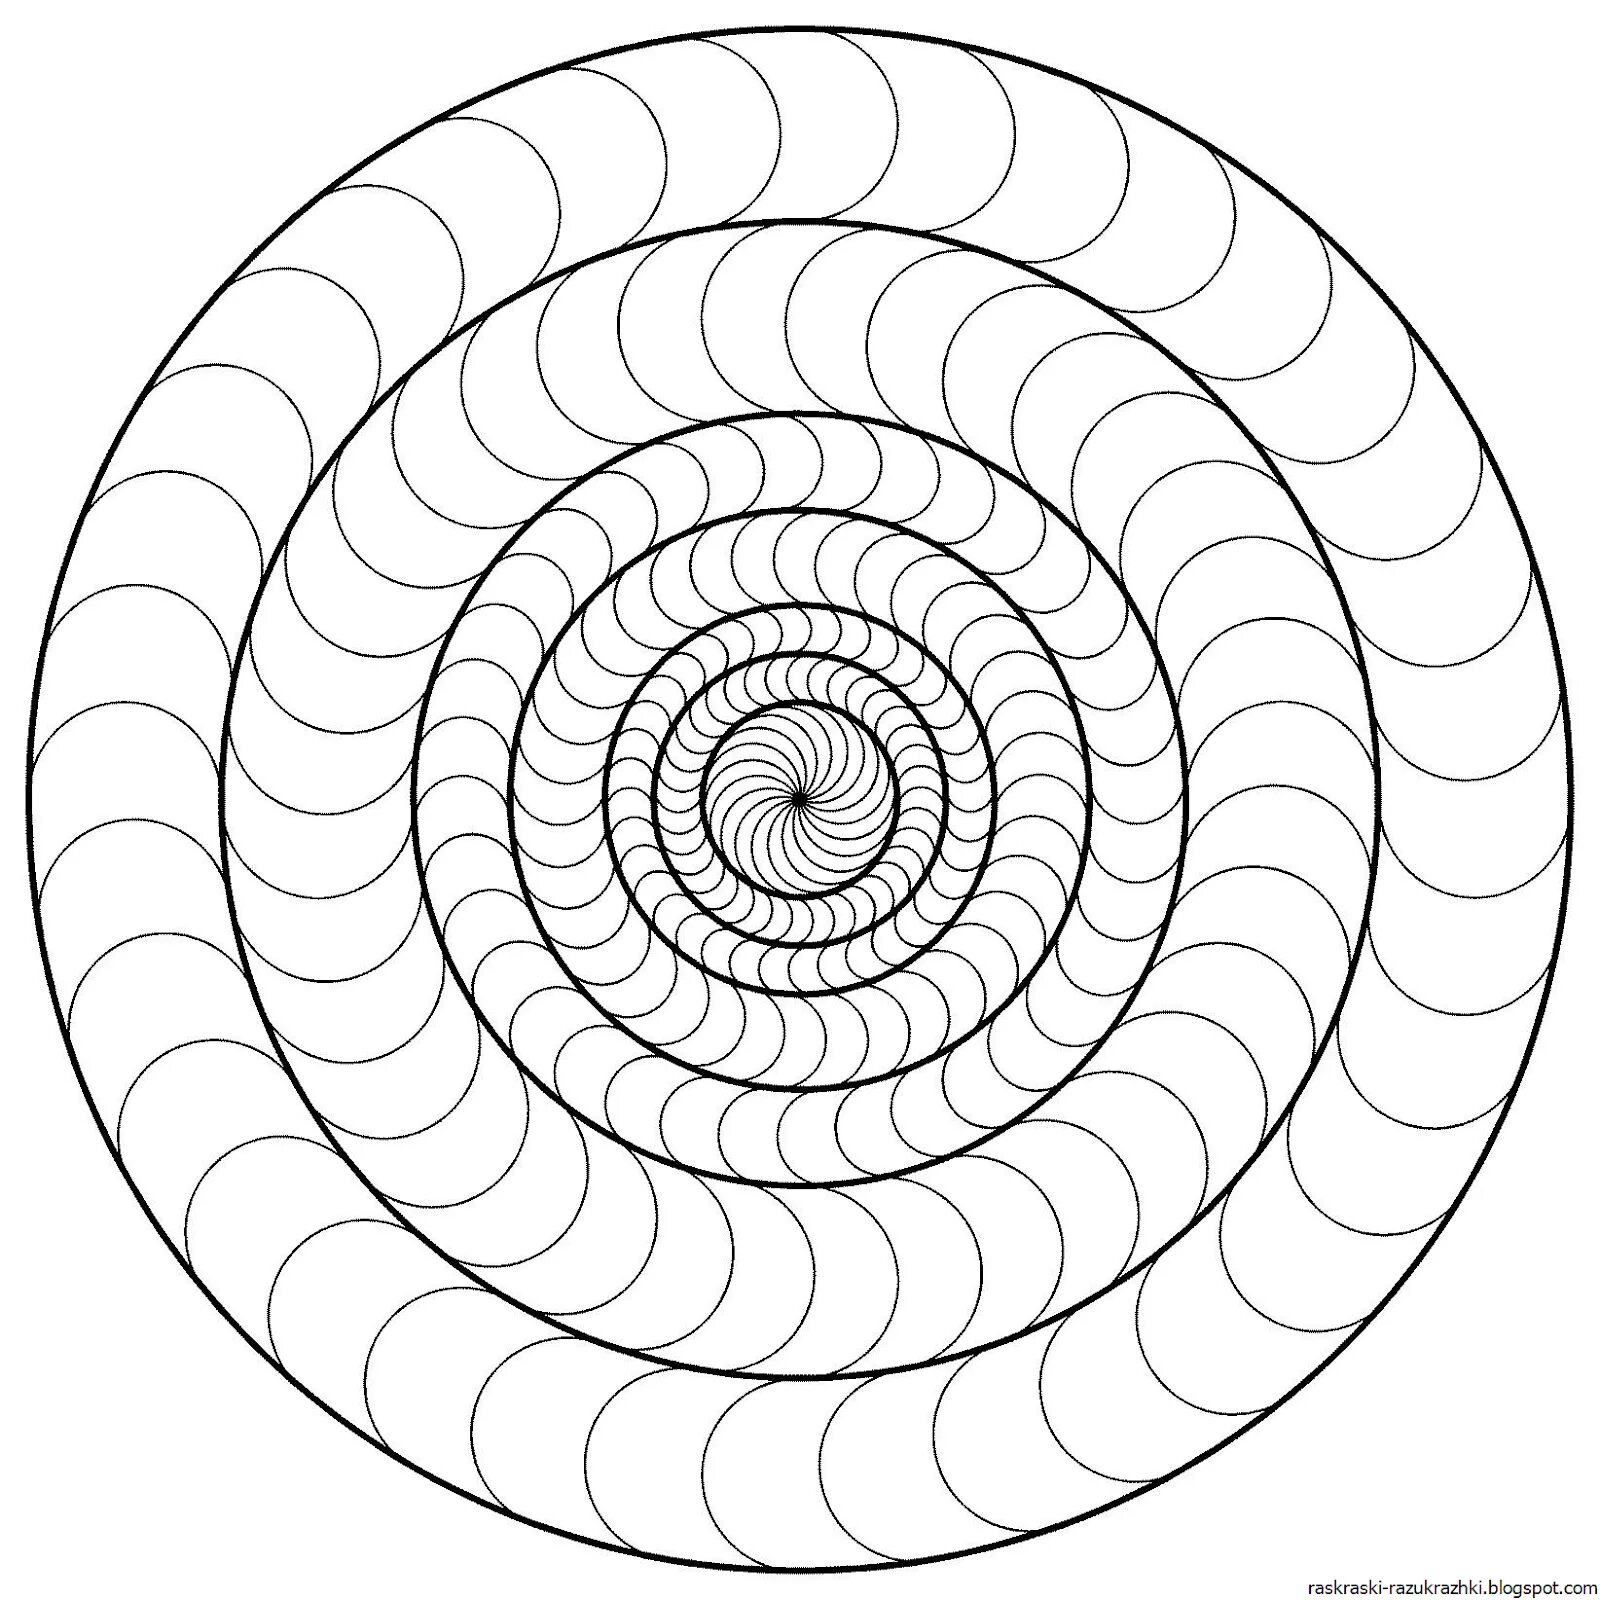 Coloring page of a spiral with a bright circular pattern